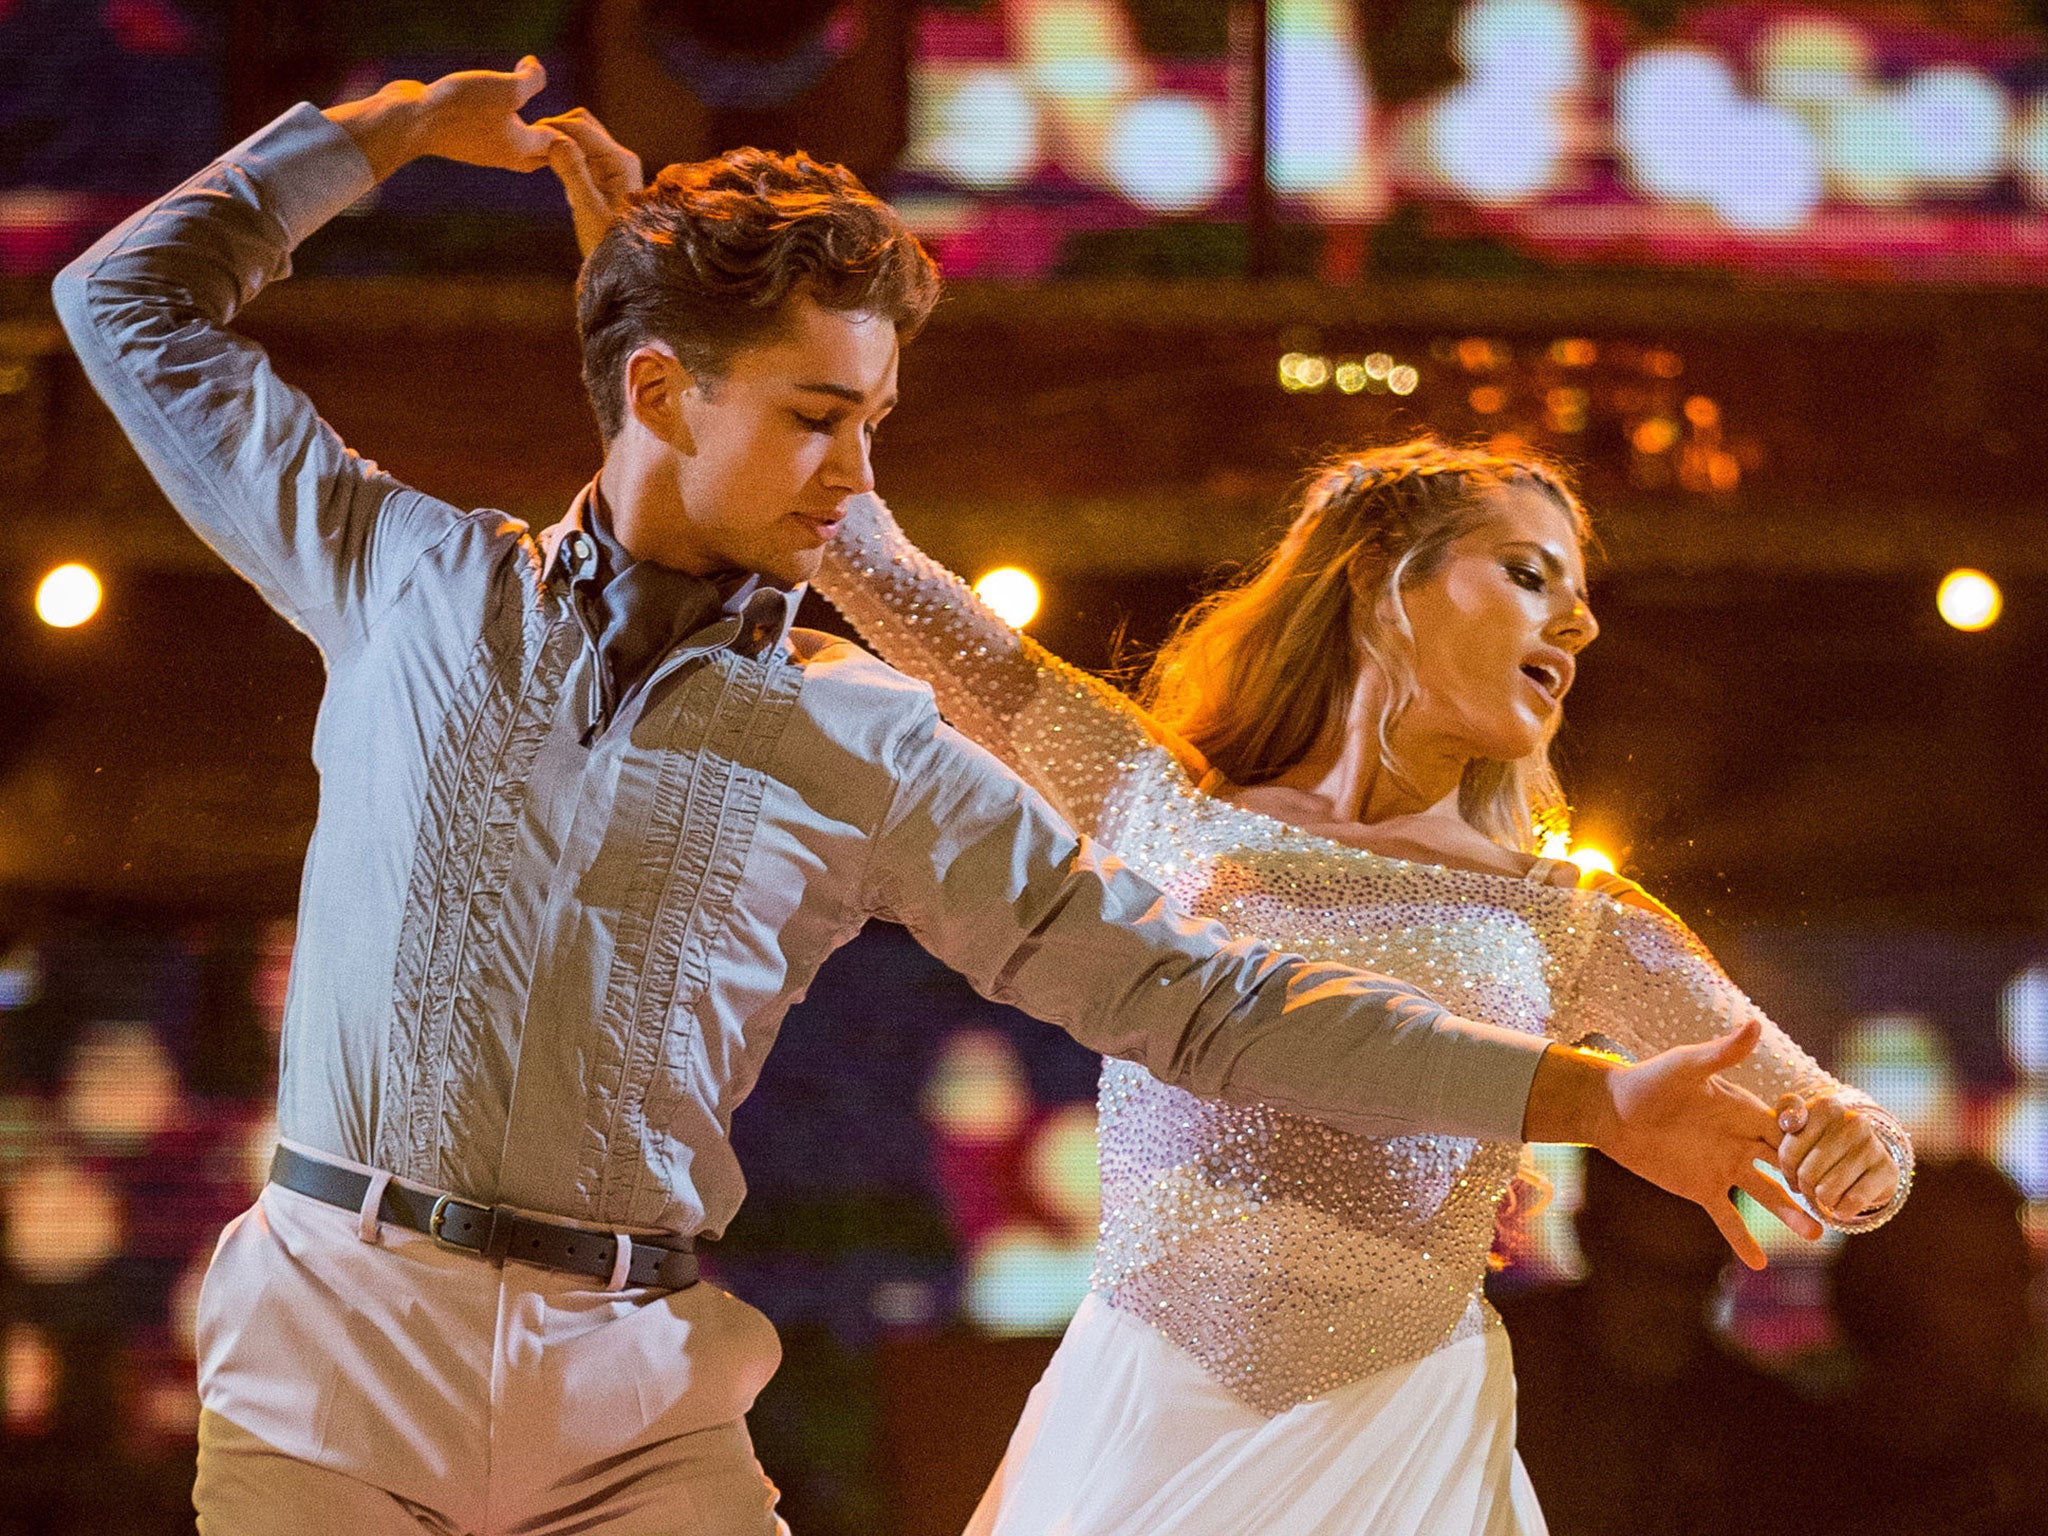 Mollie King and her dance partner AJ Pritchard competing in Strictly Come Dancing